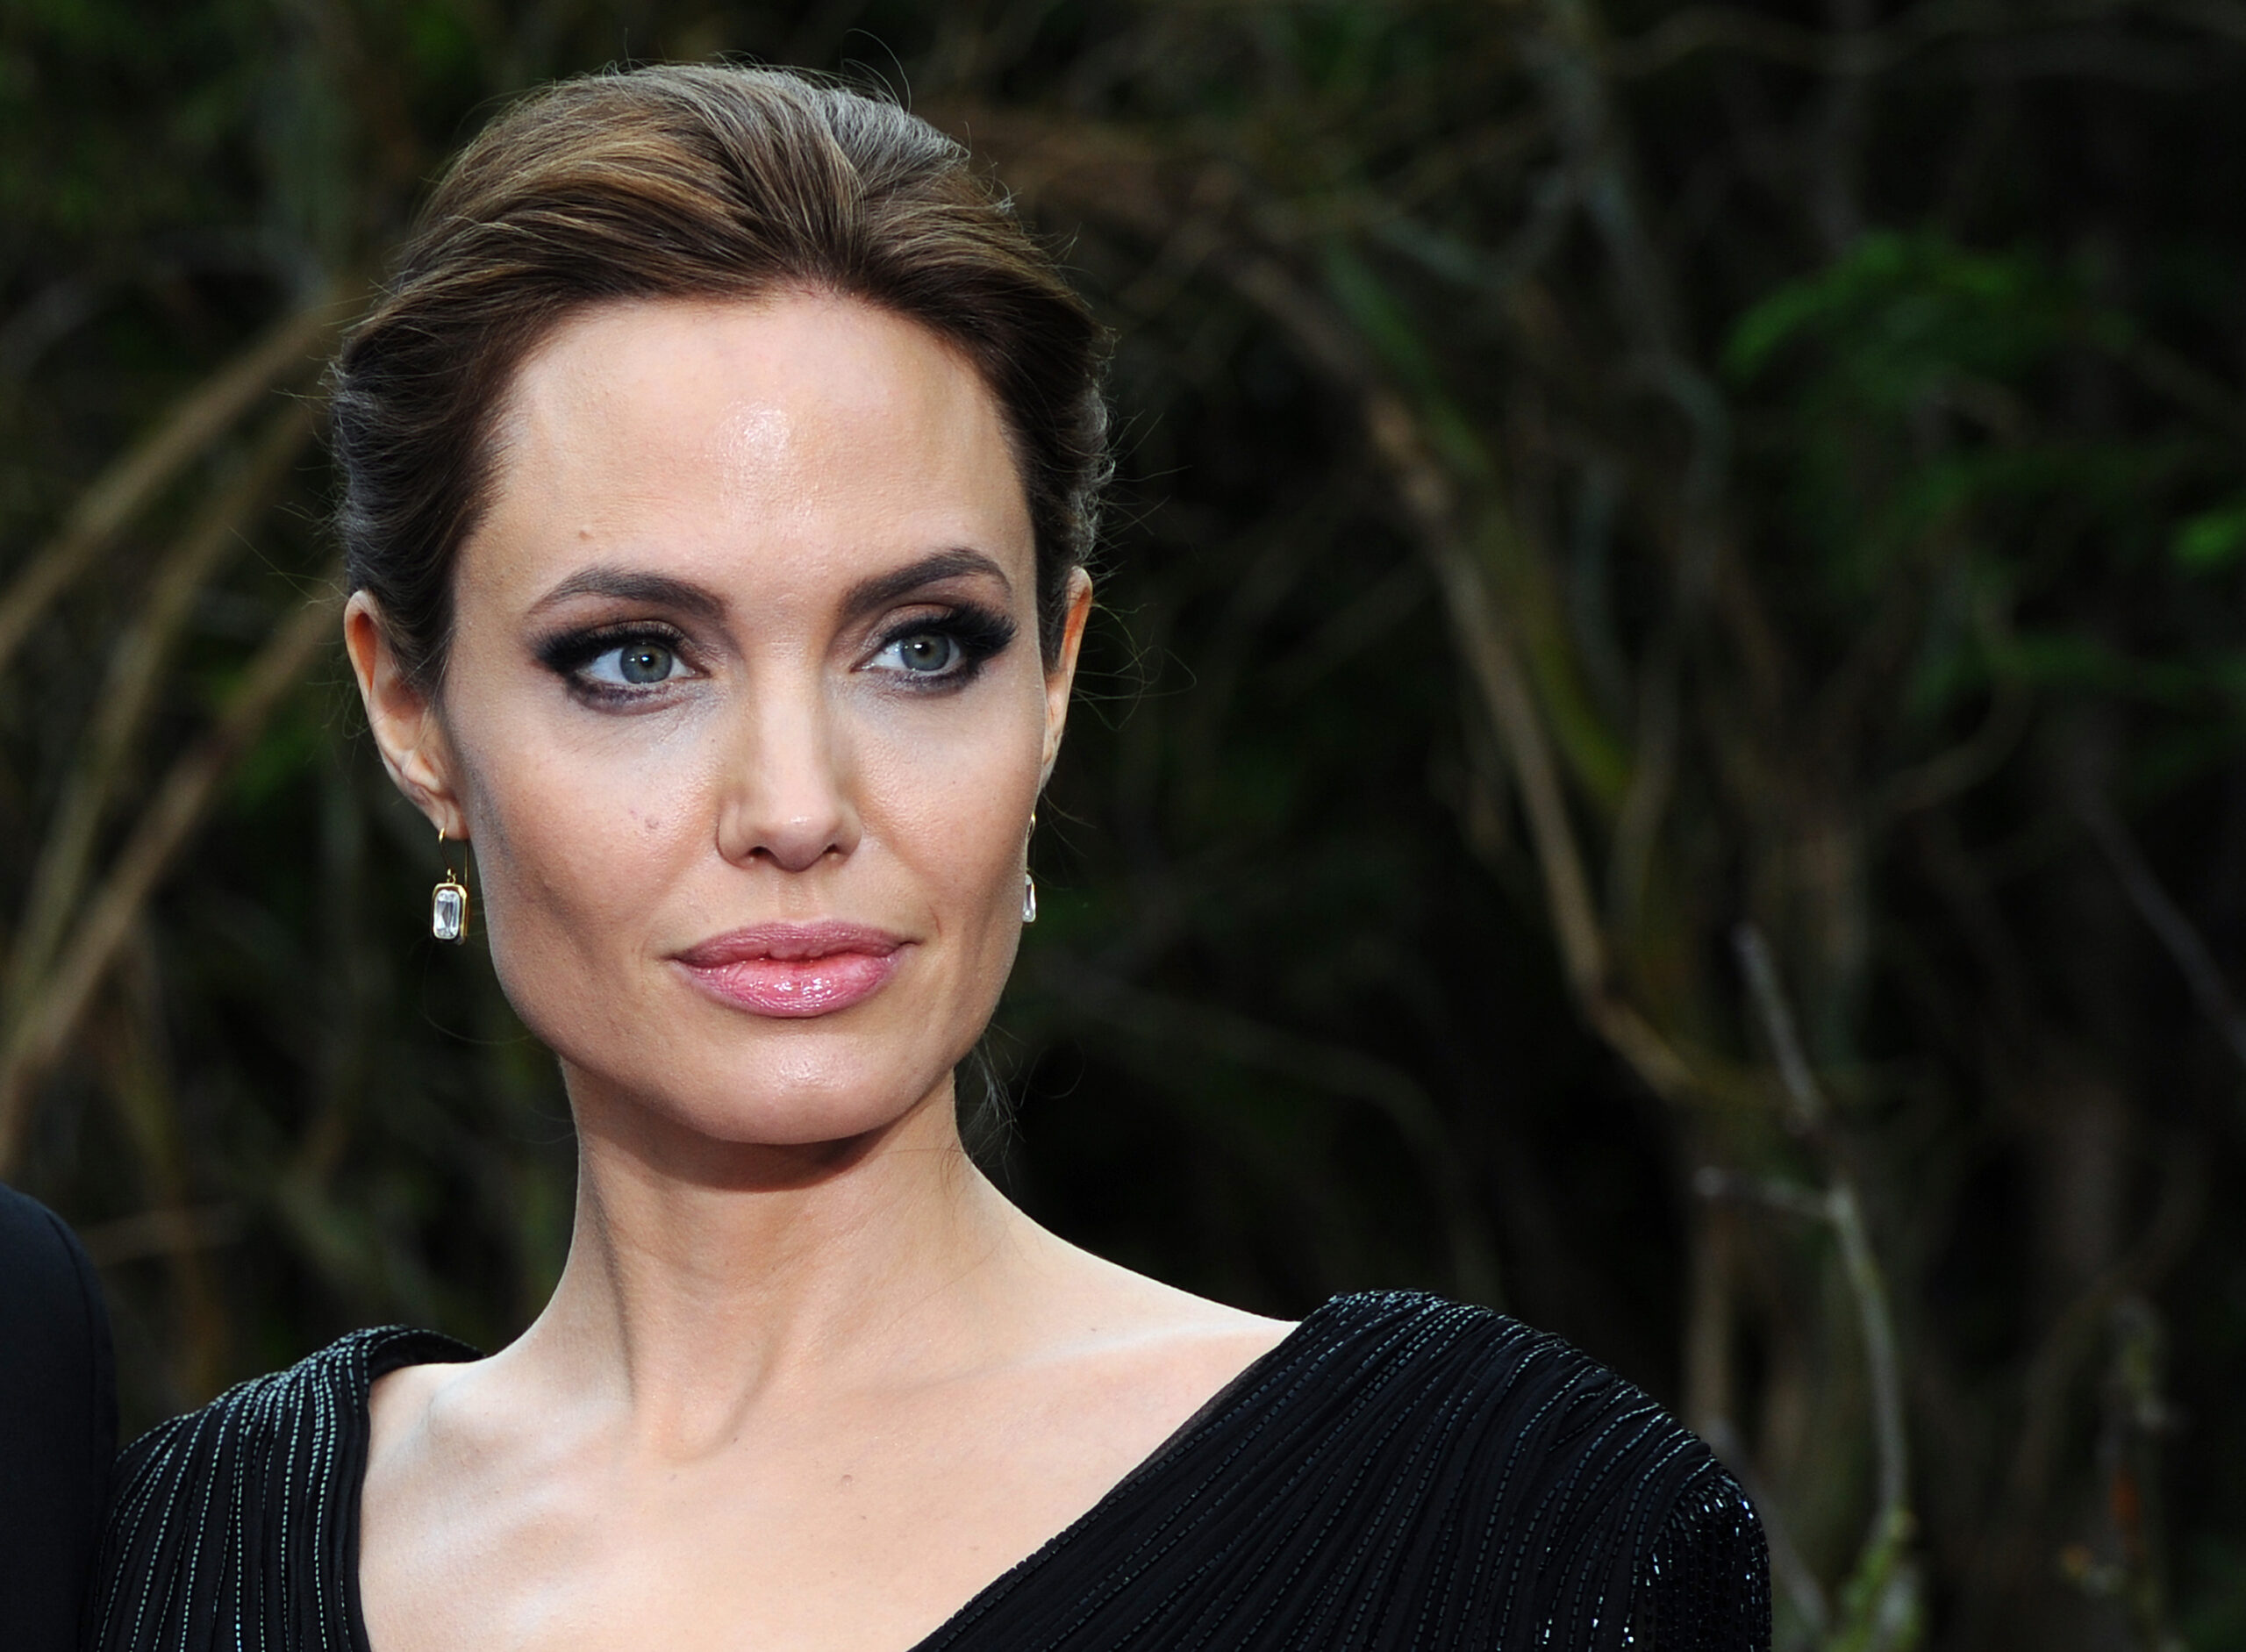 Angelina Jolie has finally made peace with her once estranged father Jon Voight